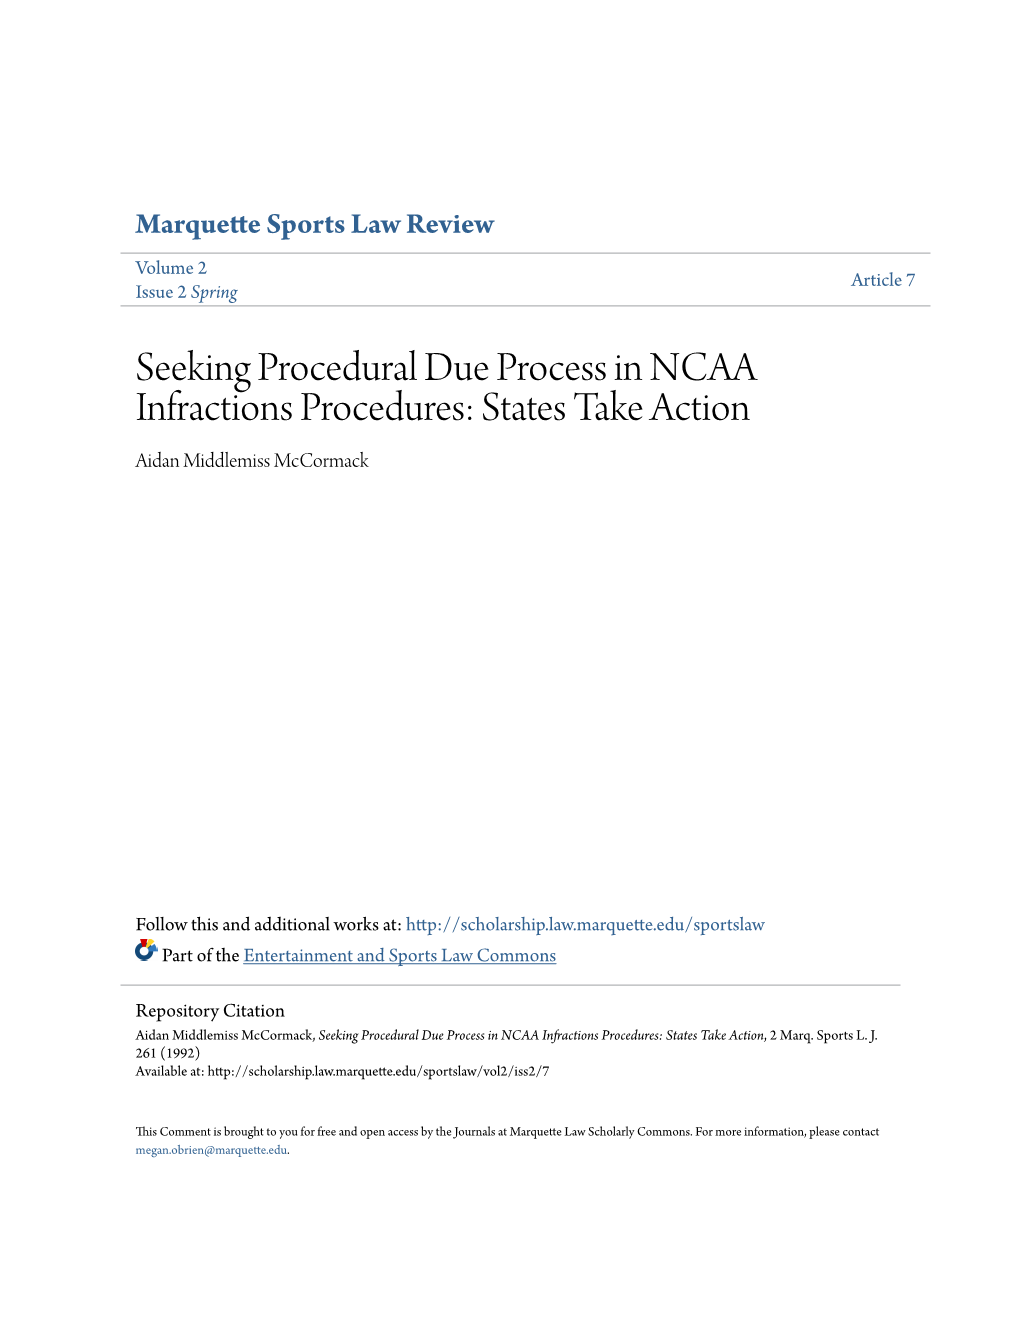 Seeking Procedural Due Process in NCAA Infractions Procedures: States Take Action Aidan Middlemiss Mccormack